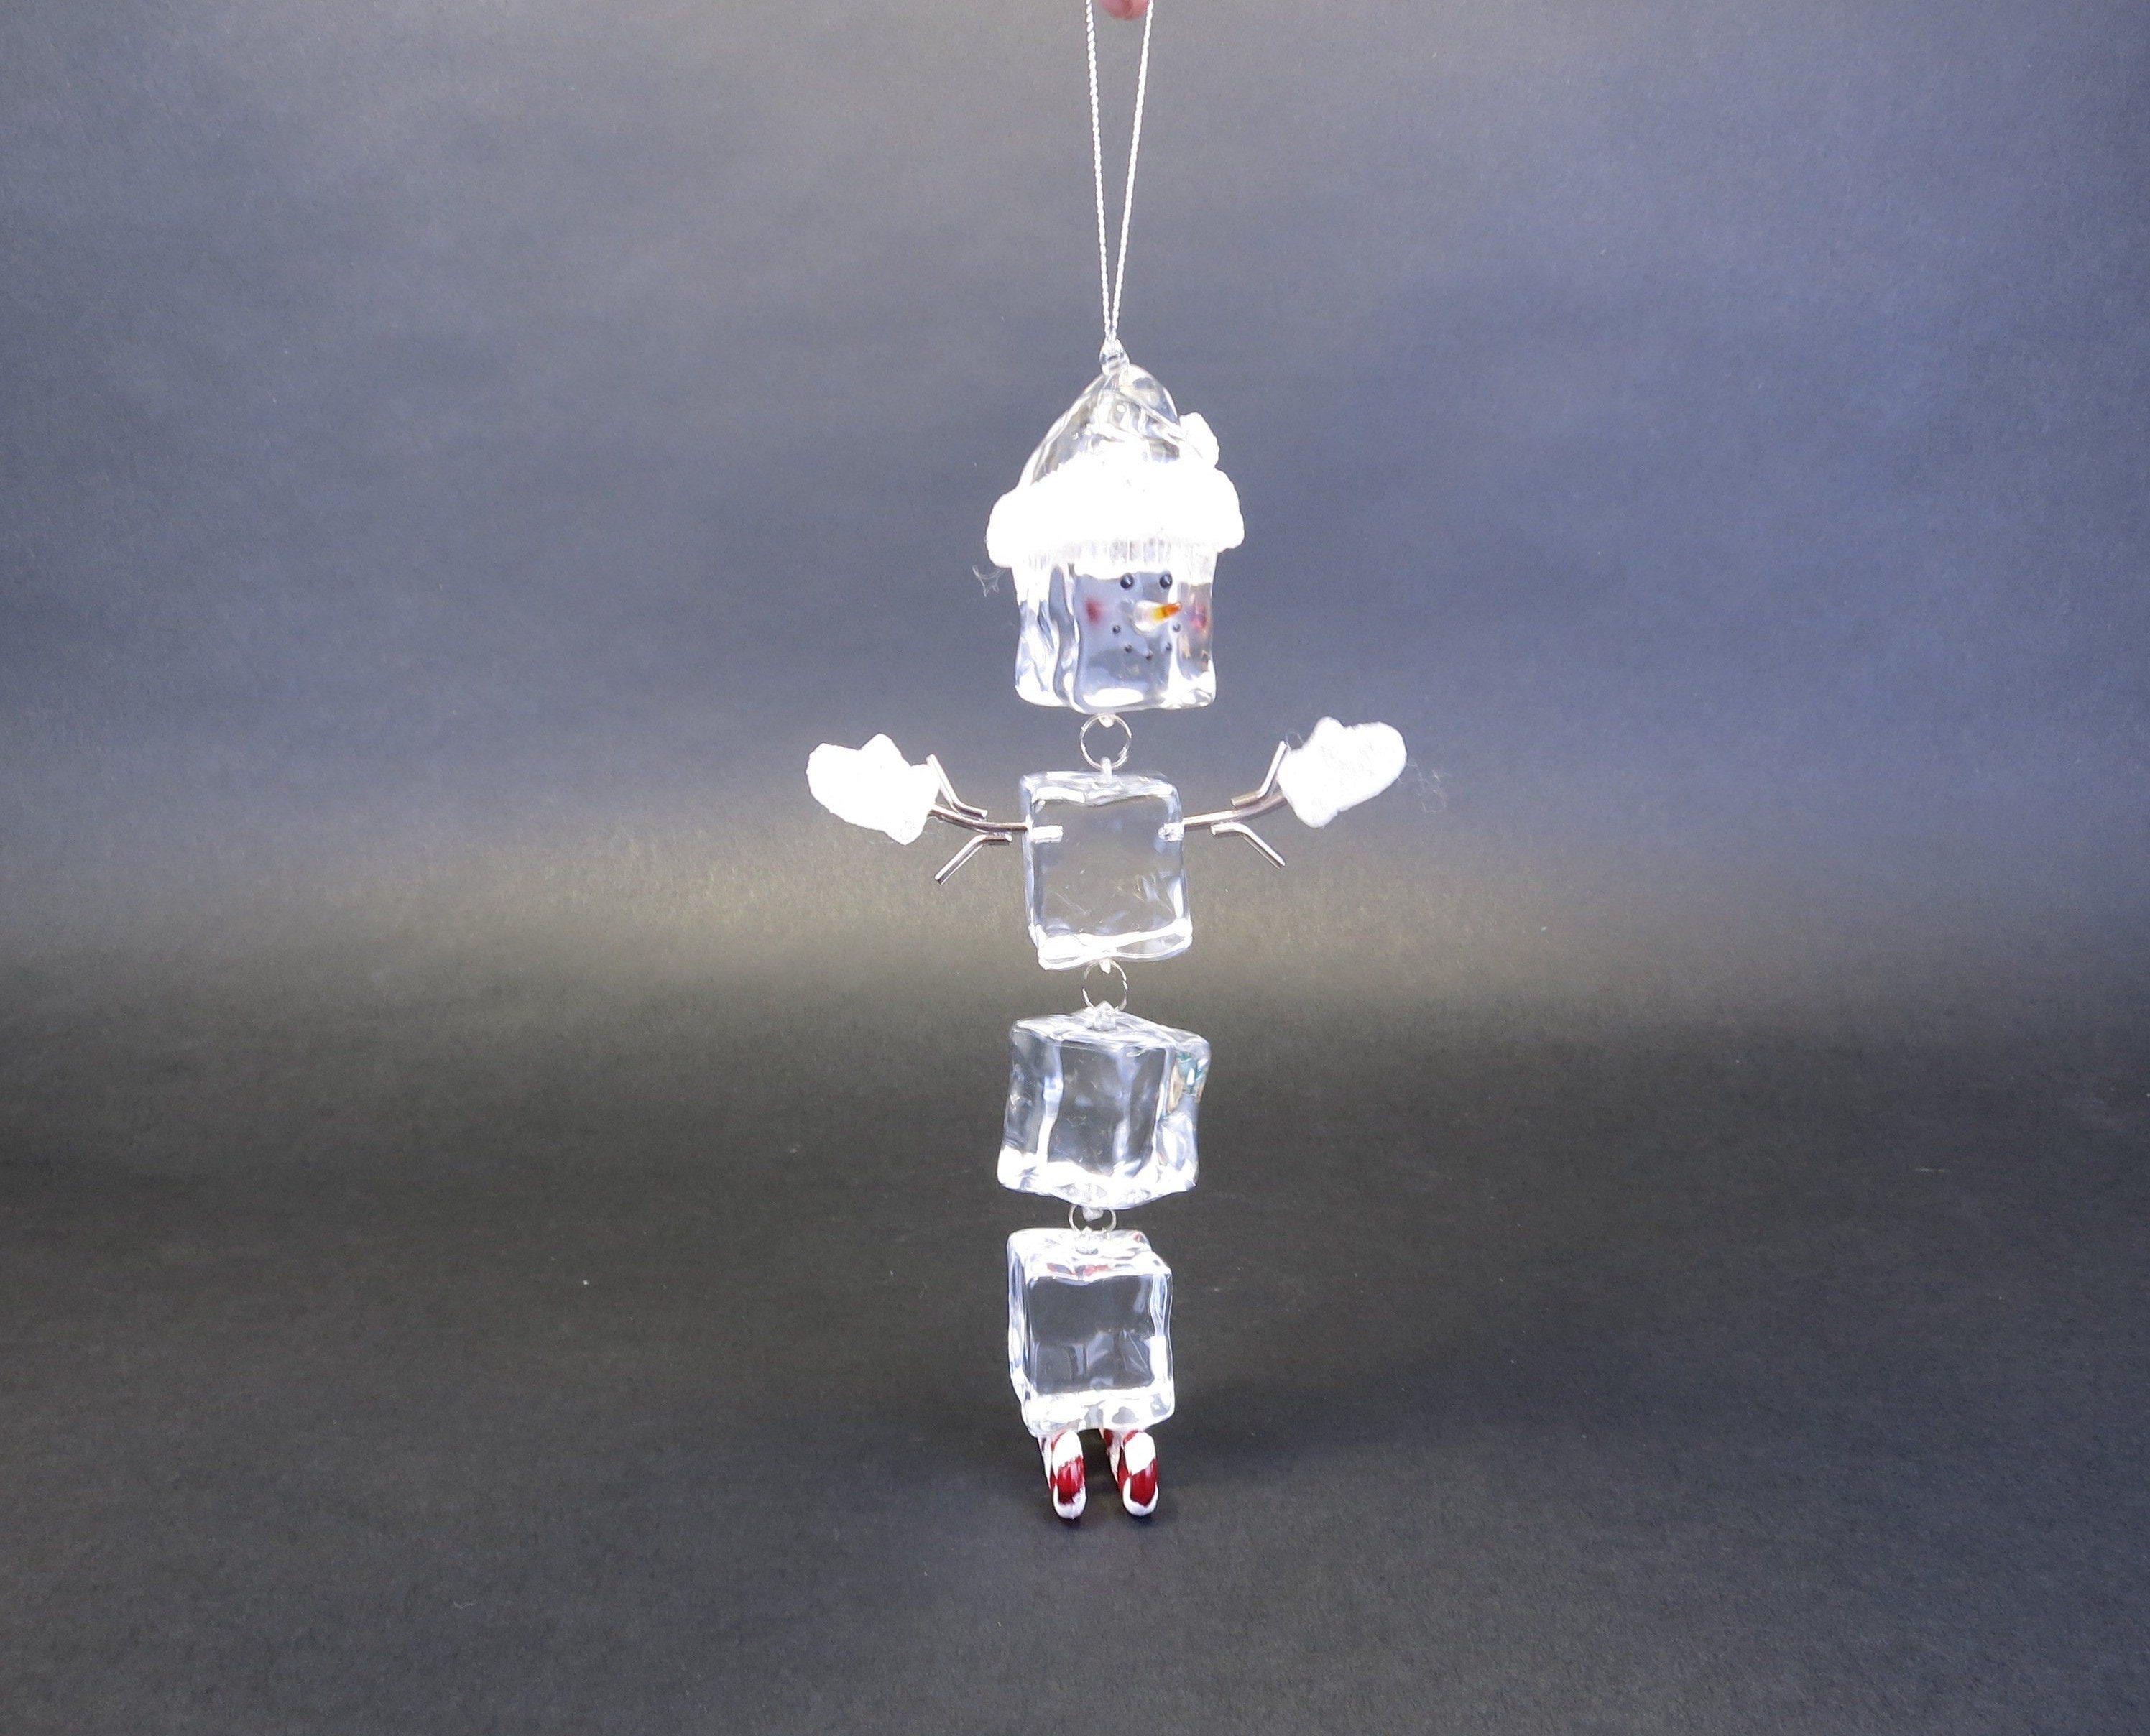 Acrylic Ice Cube Snowman Holiday Christmas Ornament with Sled Dept 56